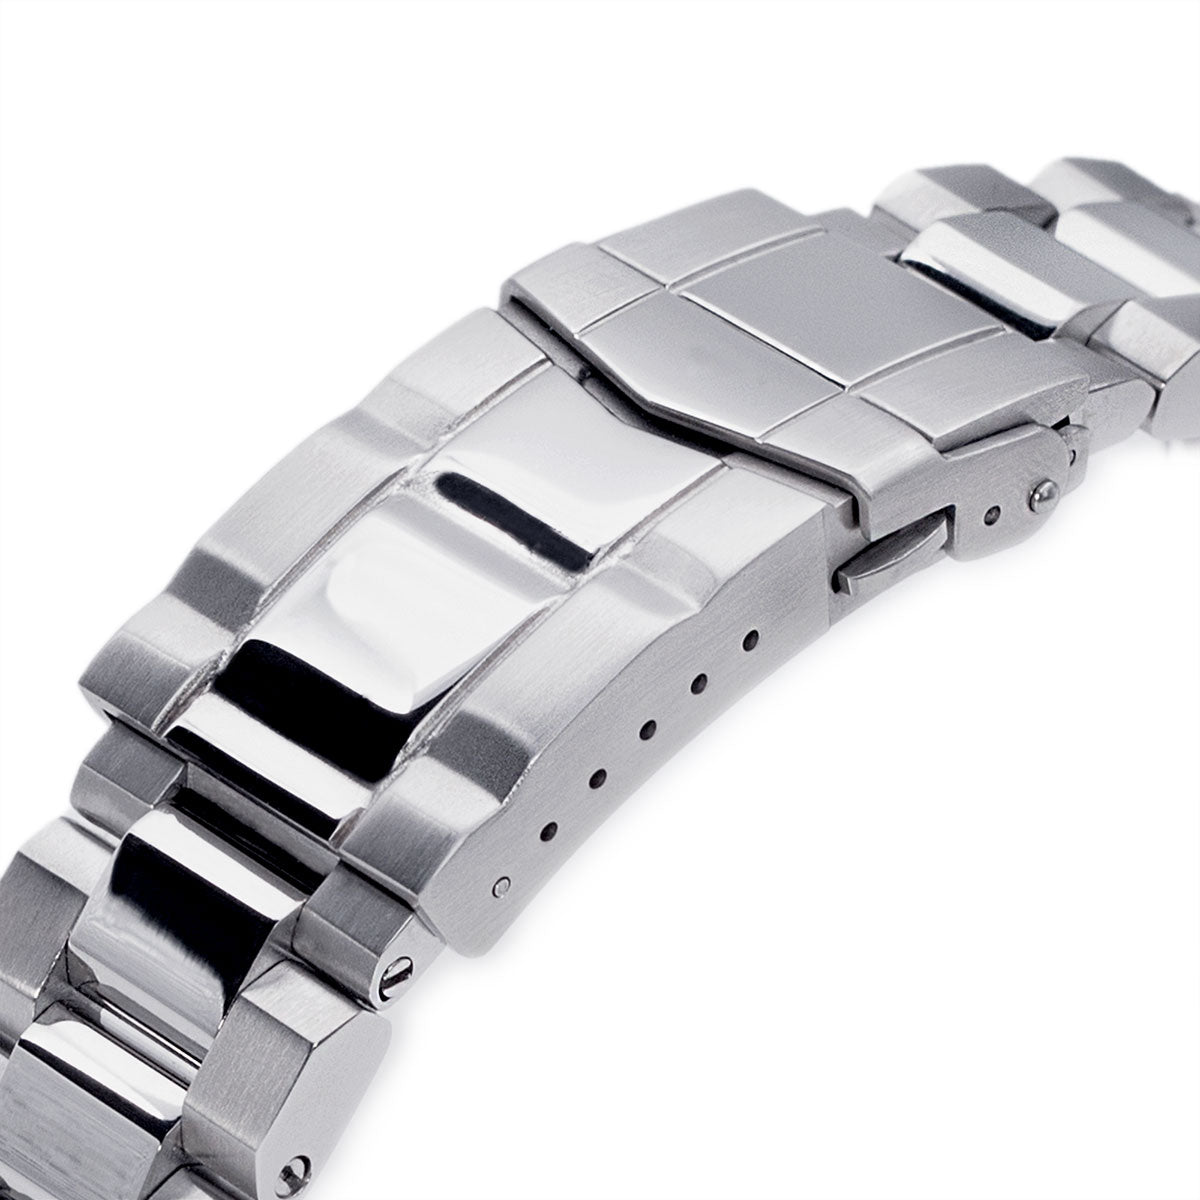 22mm Hexad Watch Band for Seiko New Turtles SRP777 & PADI SRPA21, 316L Stainless Steel Polished & Brushed SUB Clasp